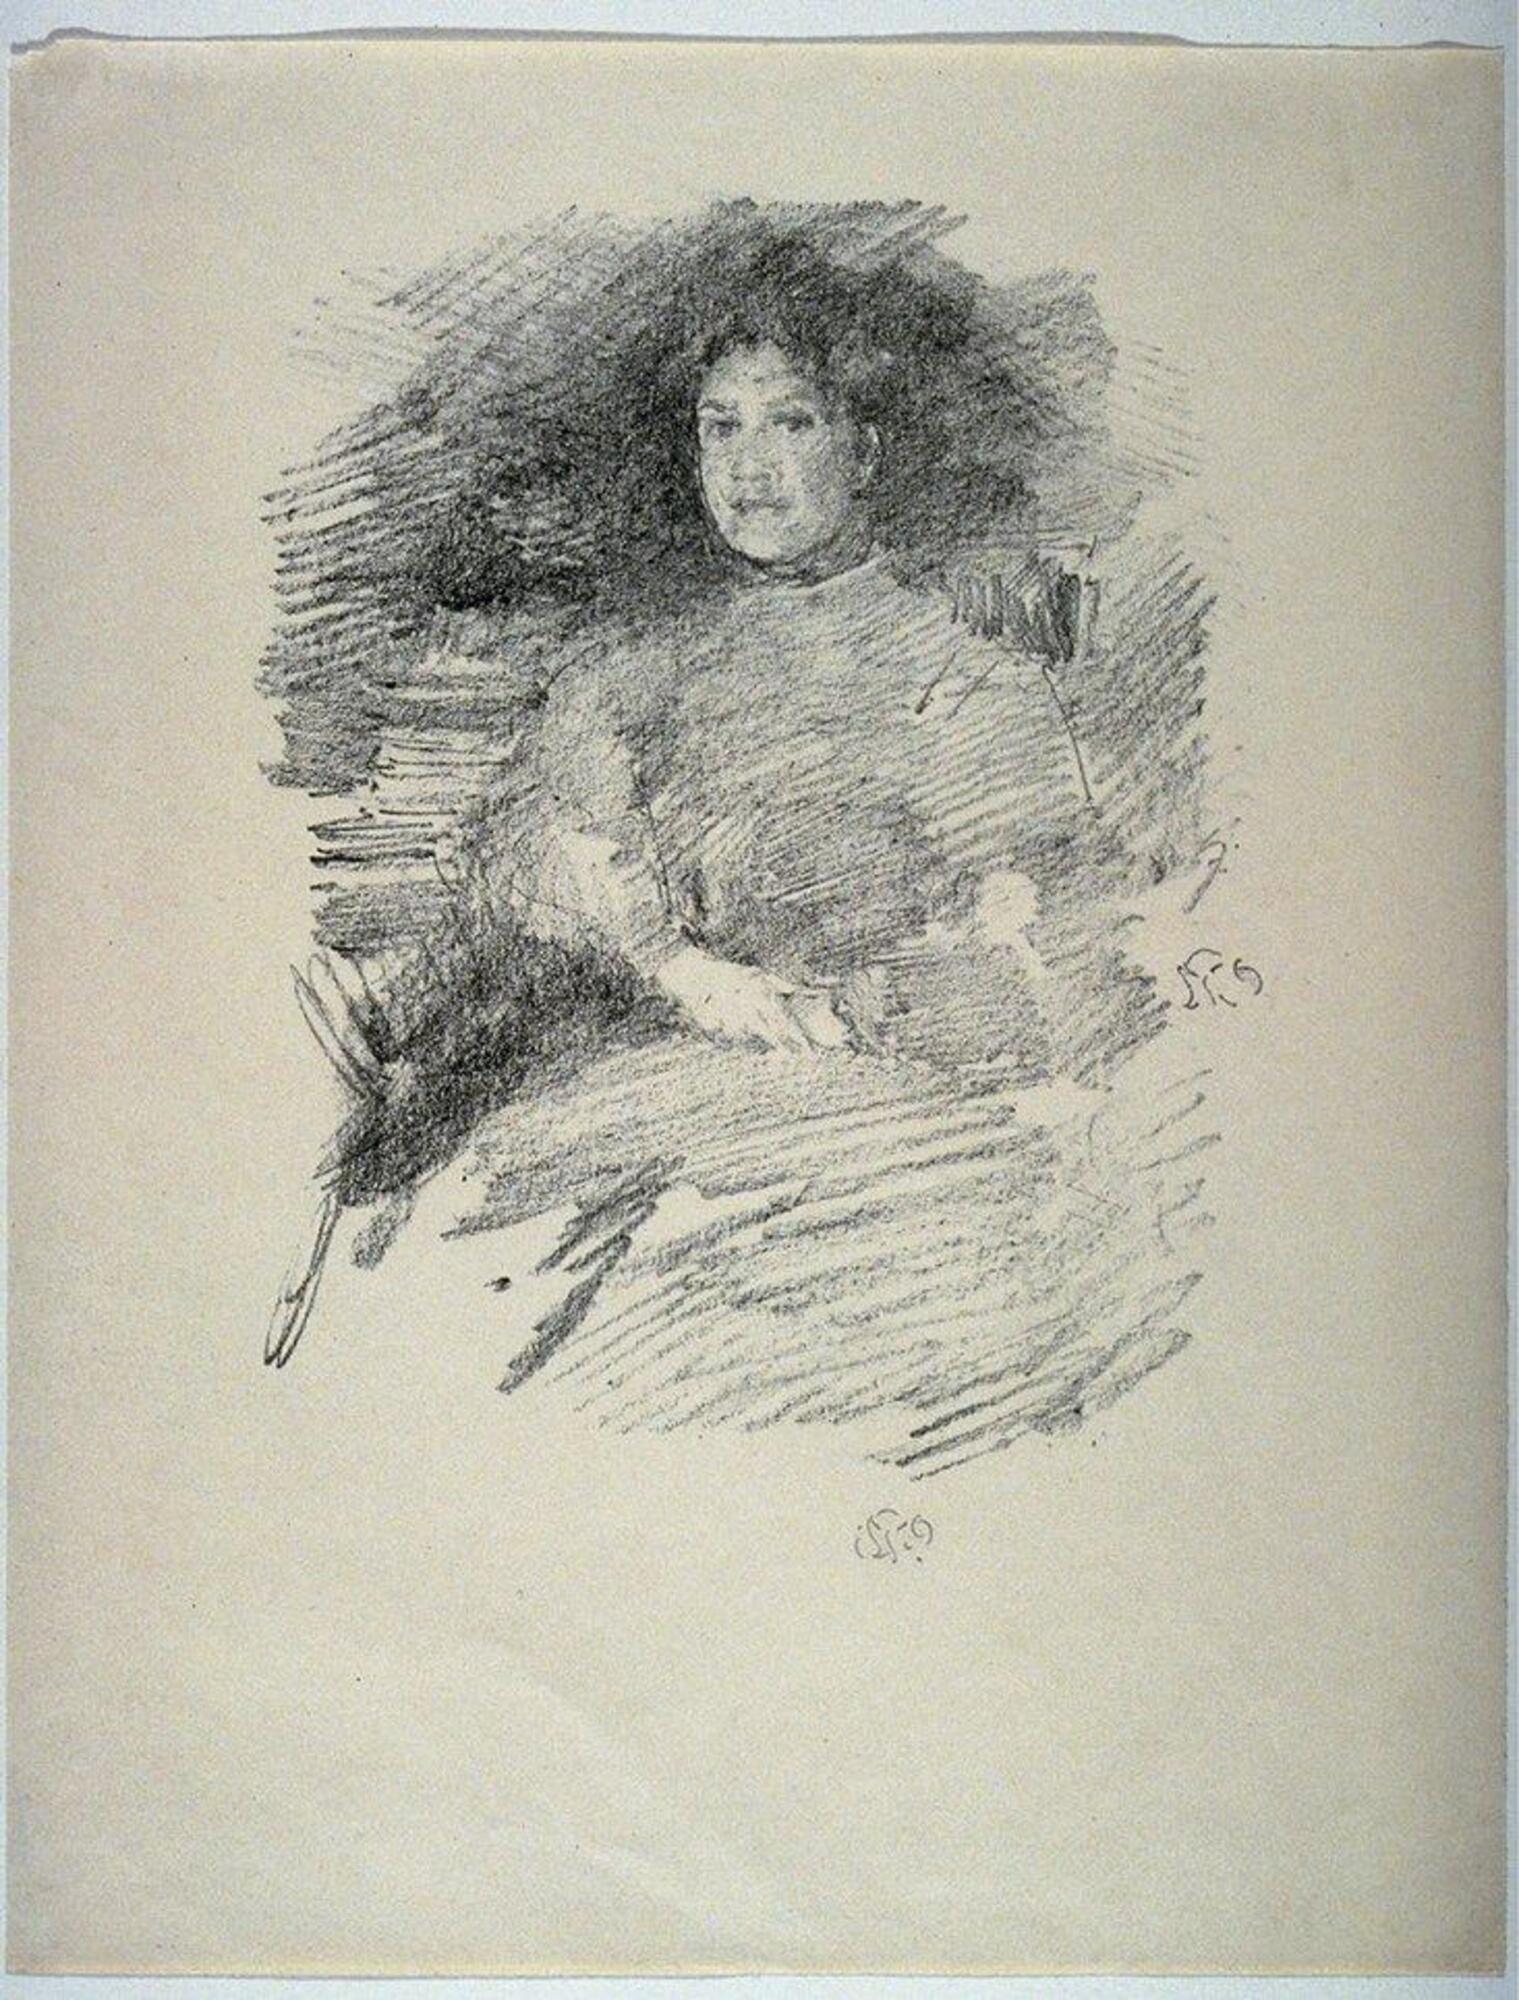 A woman seated in an armchair, facing towards the left, looks at the viewer. The background is dark but otherwise undescribed.